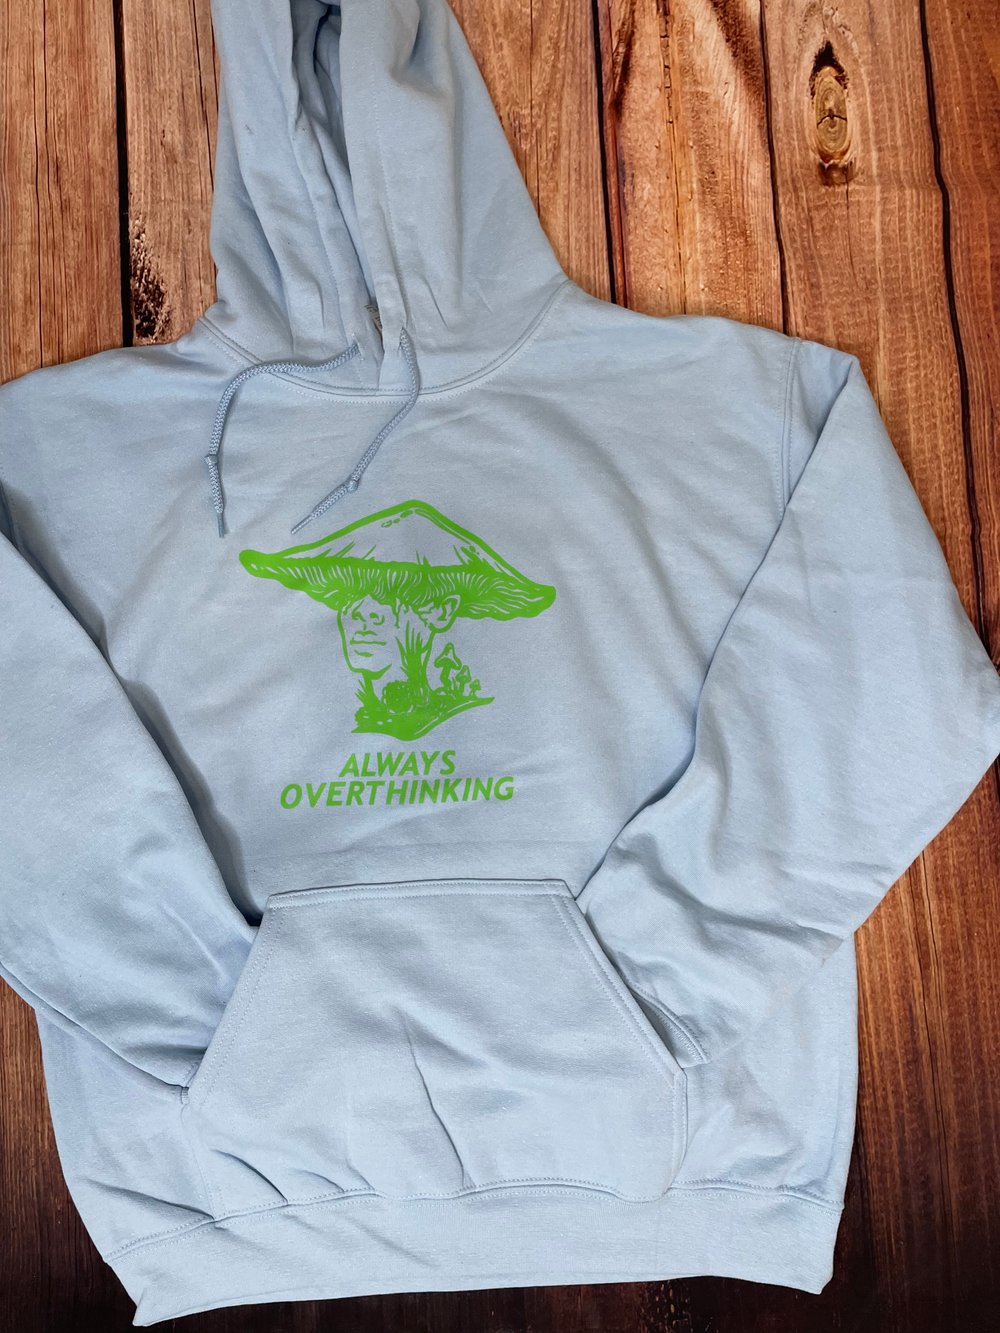 Always overthinking hoodies (multiple colors available)